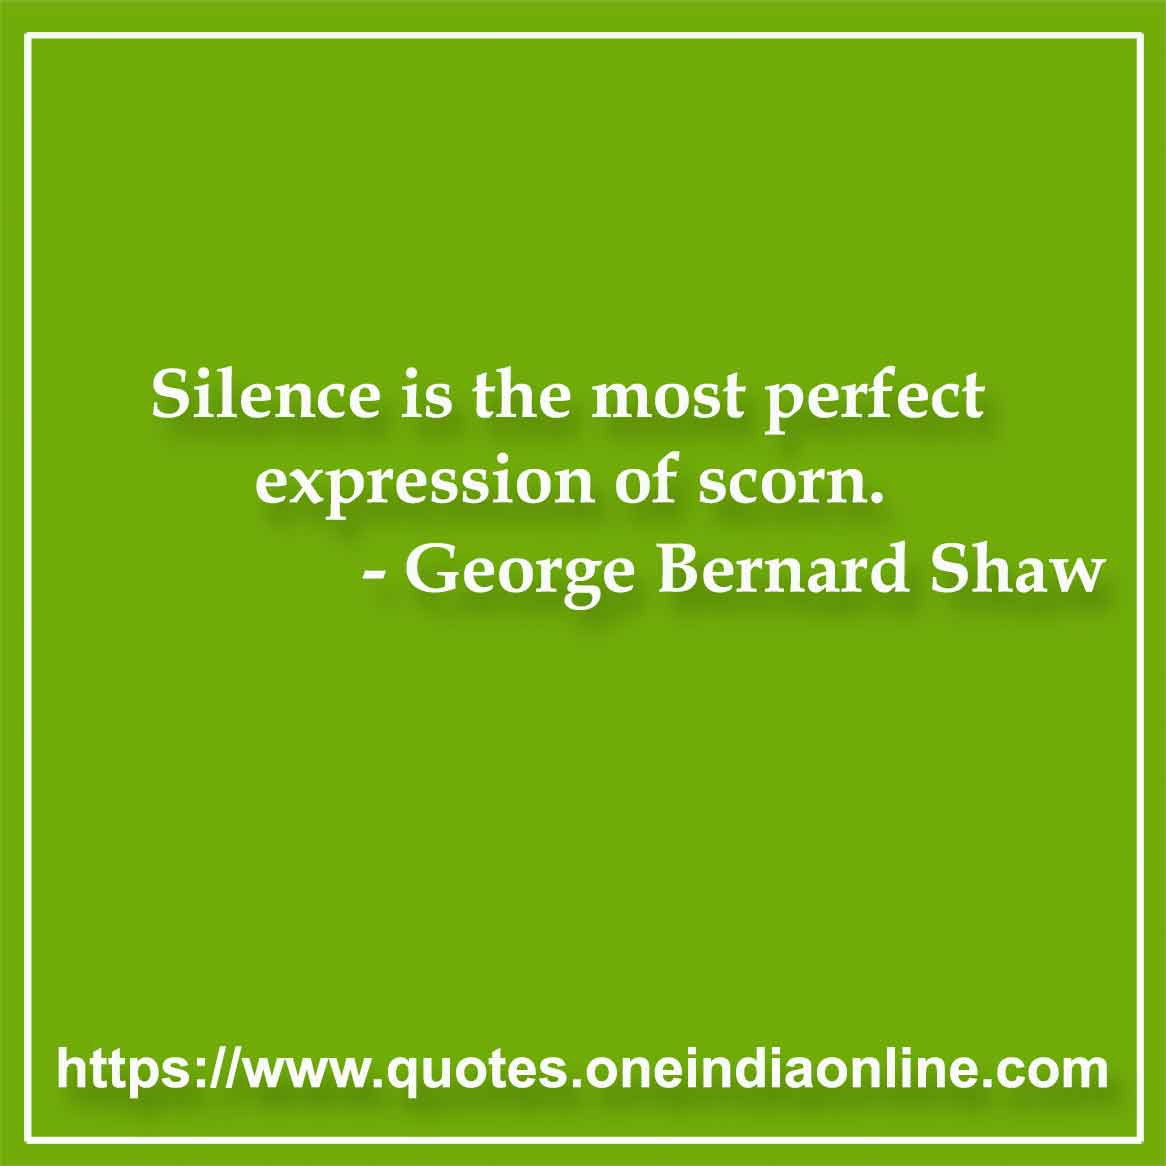 Silence is the most perfect expression of scorn.

- Silence Quotes by George Bernard Shaw 